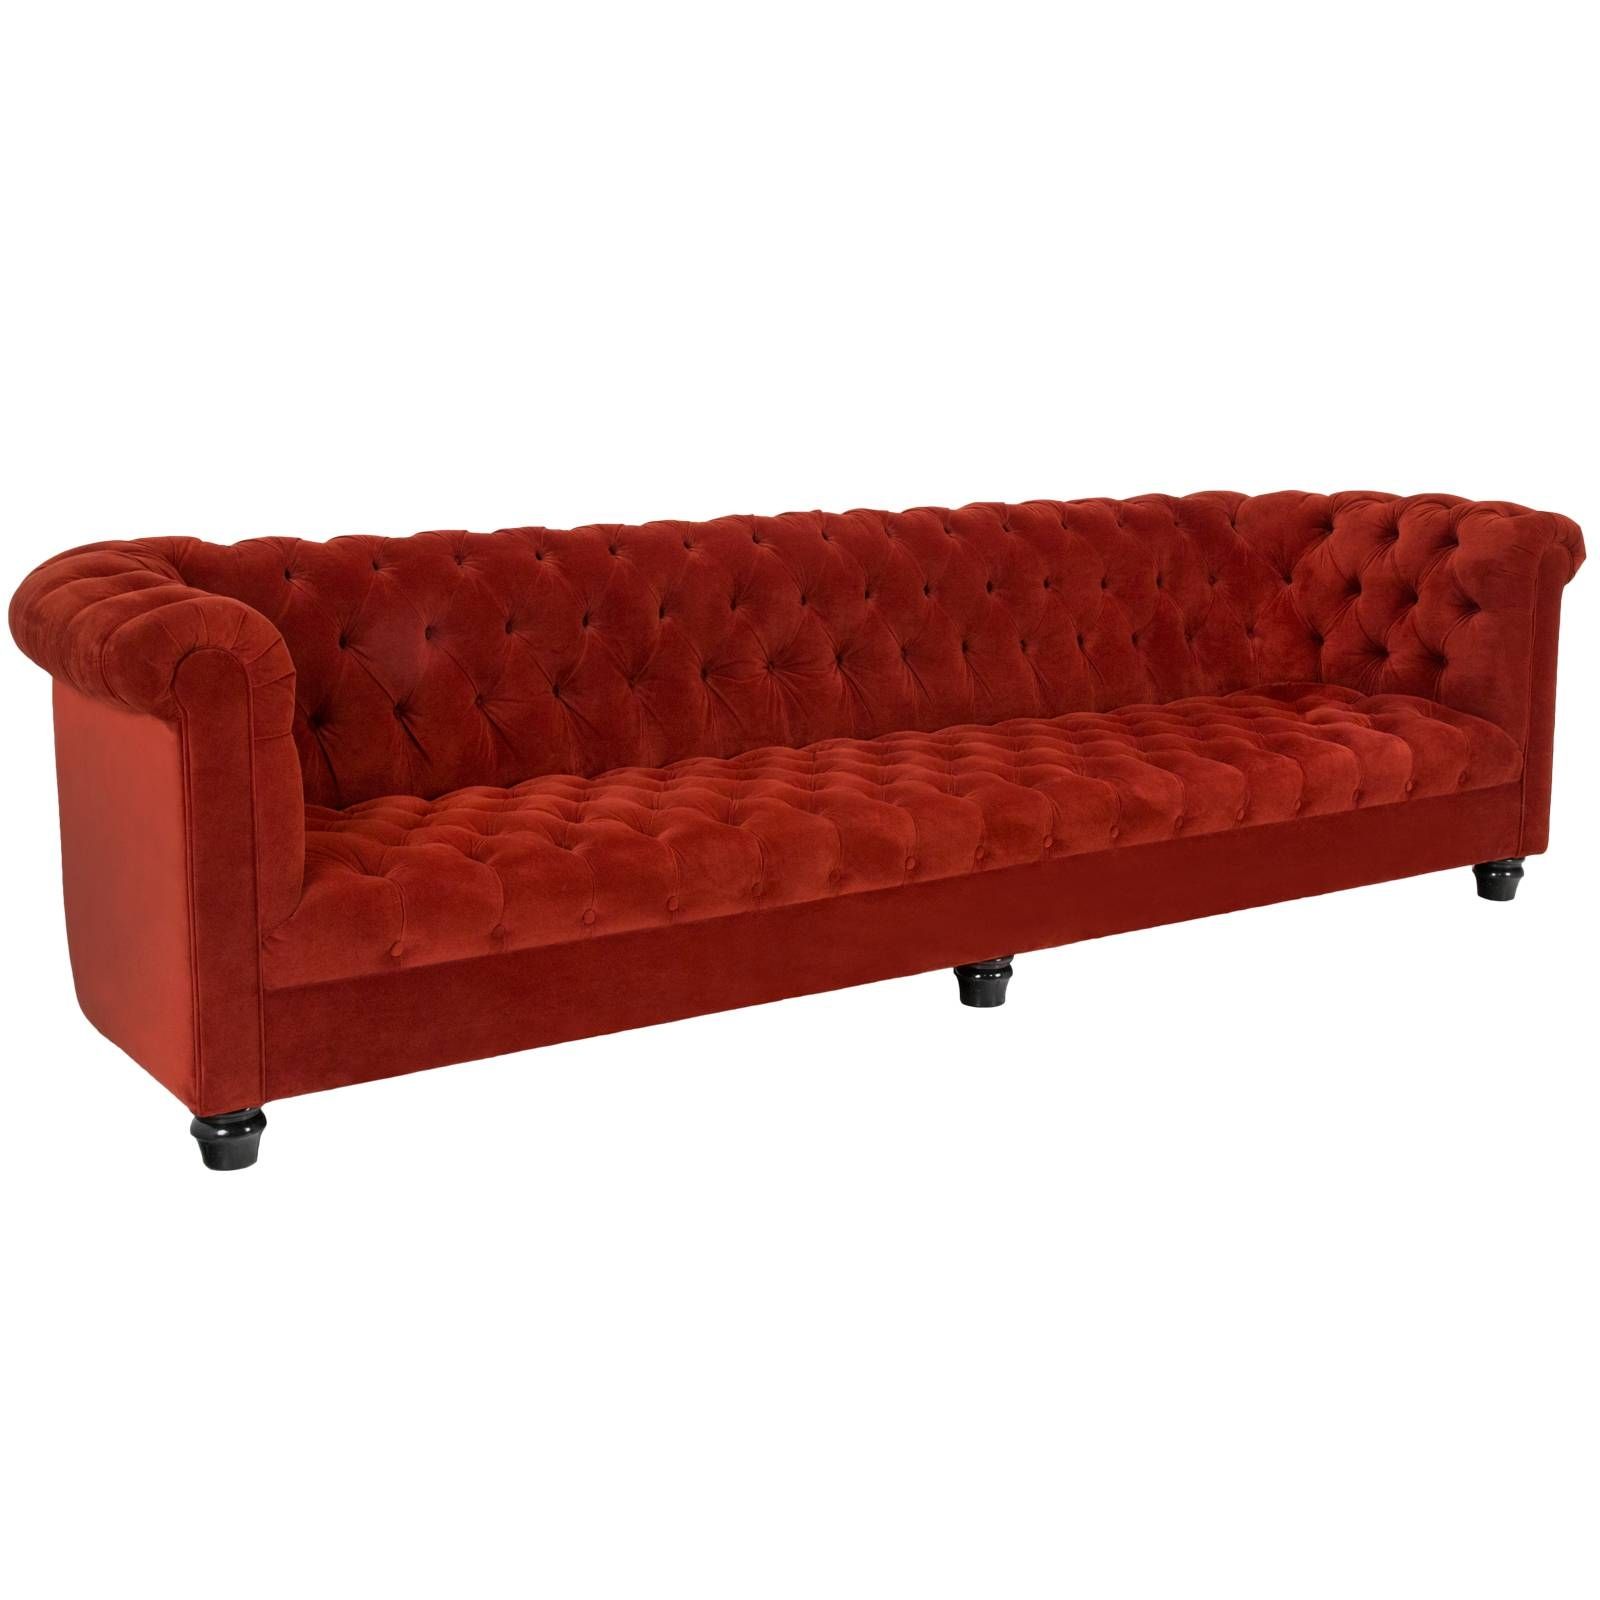 Tufted Sofa Rentals | Event Furniture Rental With Manchester Sofas (View 4 of 30)